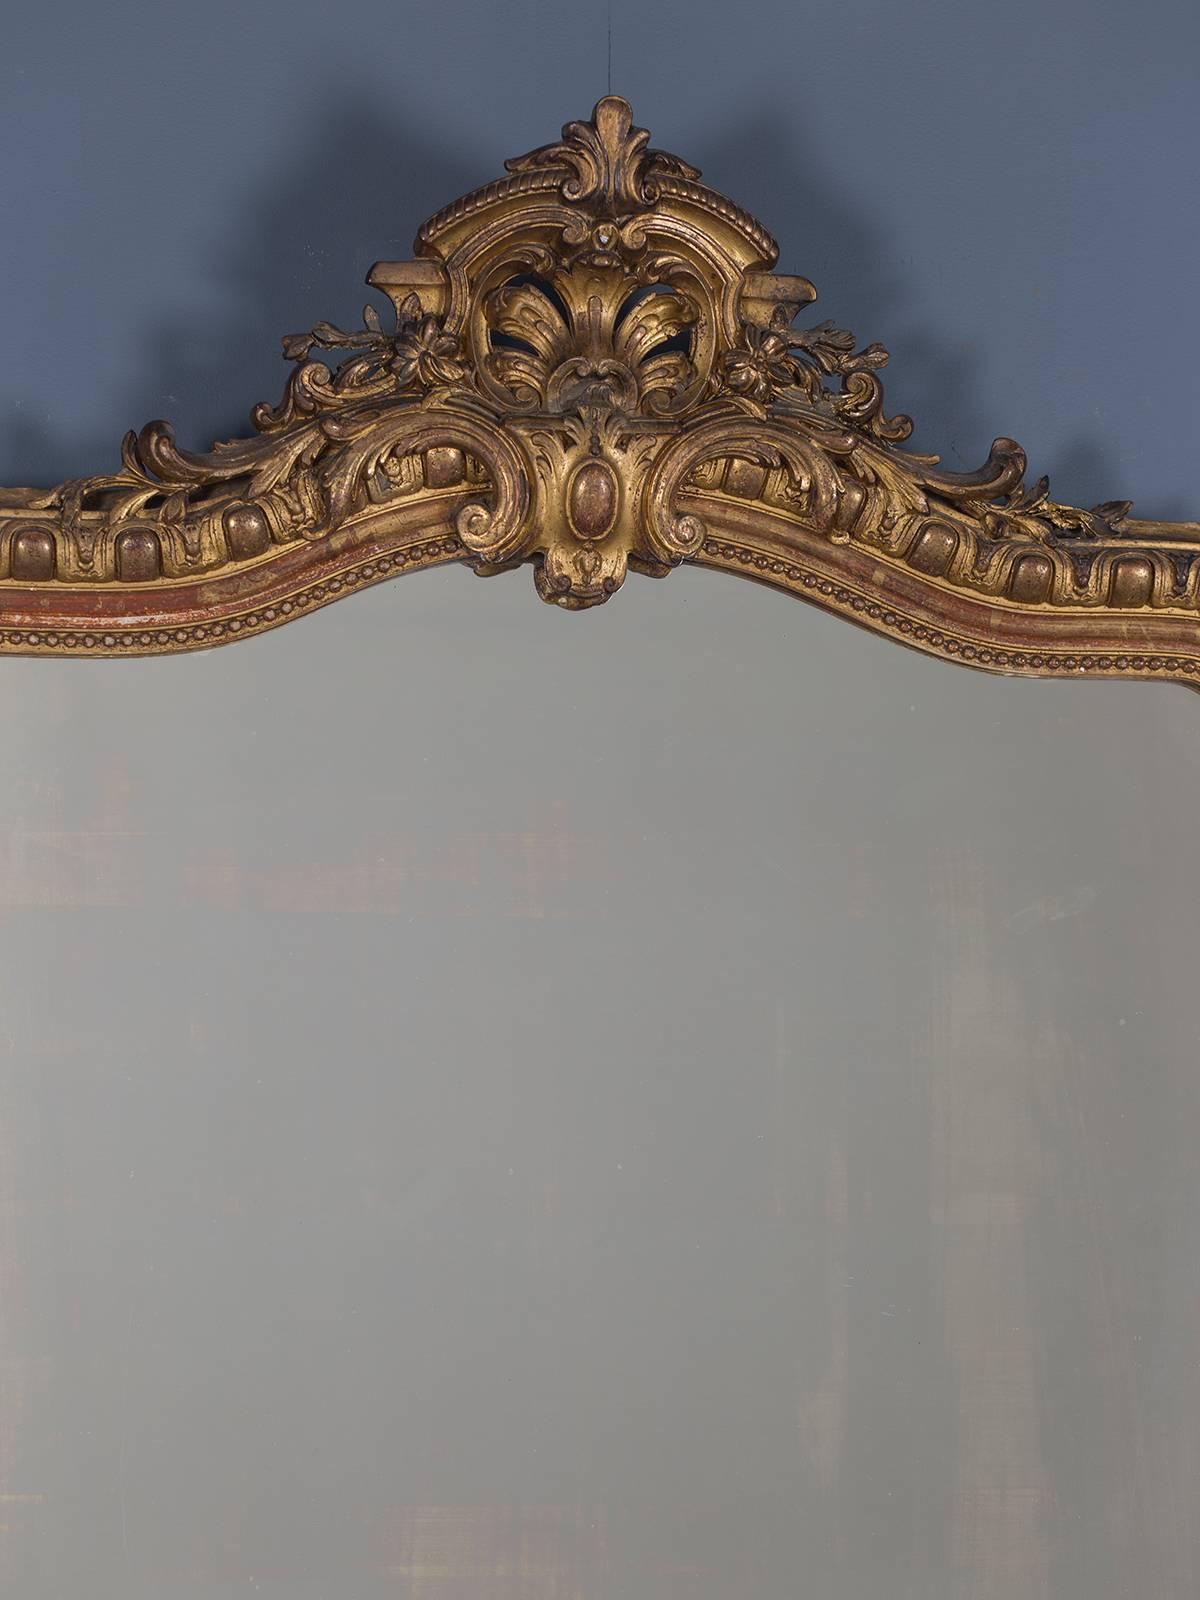 Receive our new selections direct from 1stdibs by email each week. Please click “Follow Dealer” button below and see them first!

The handsome proportion of this antique French Louis Philippe mirror, circa 1880 along with the bold scale of its